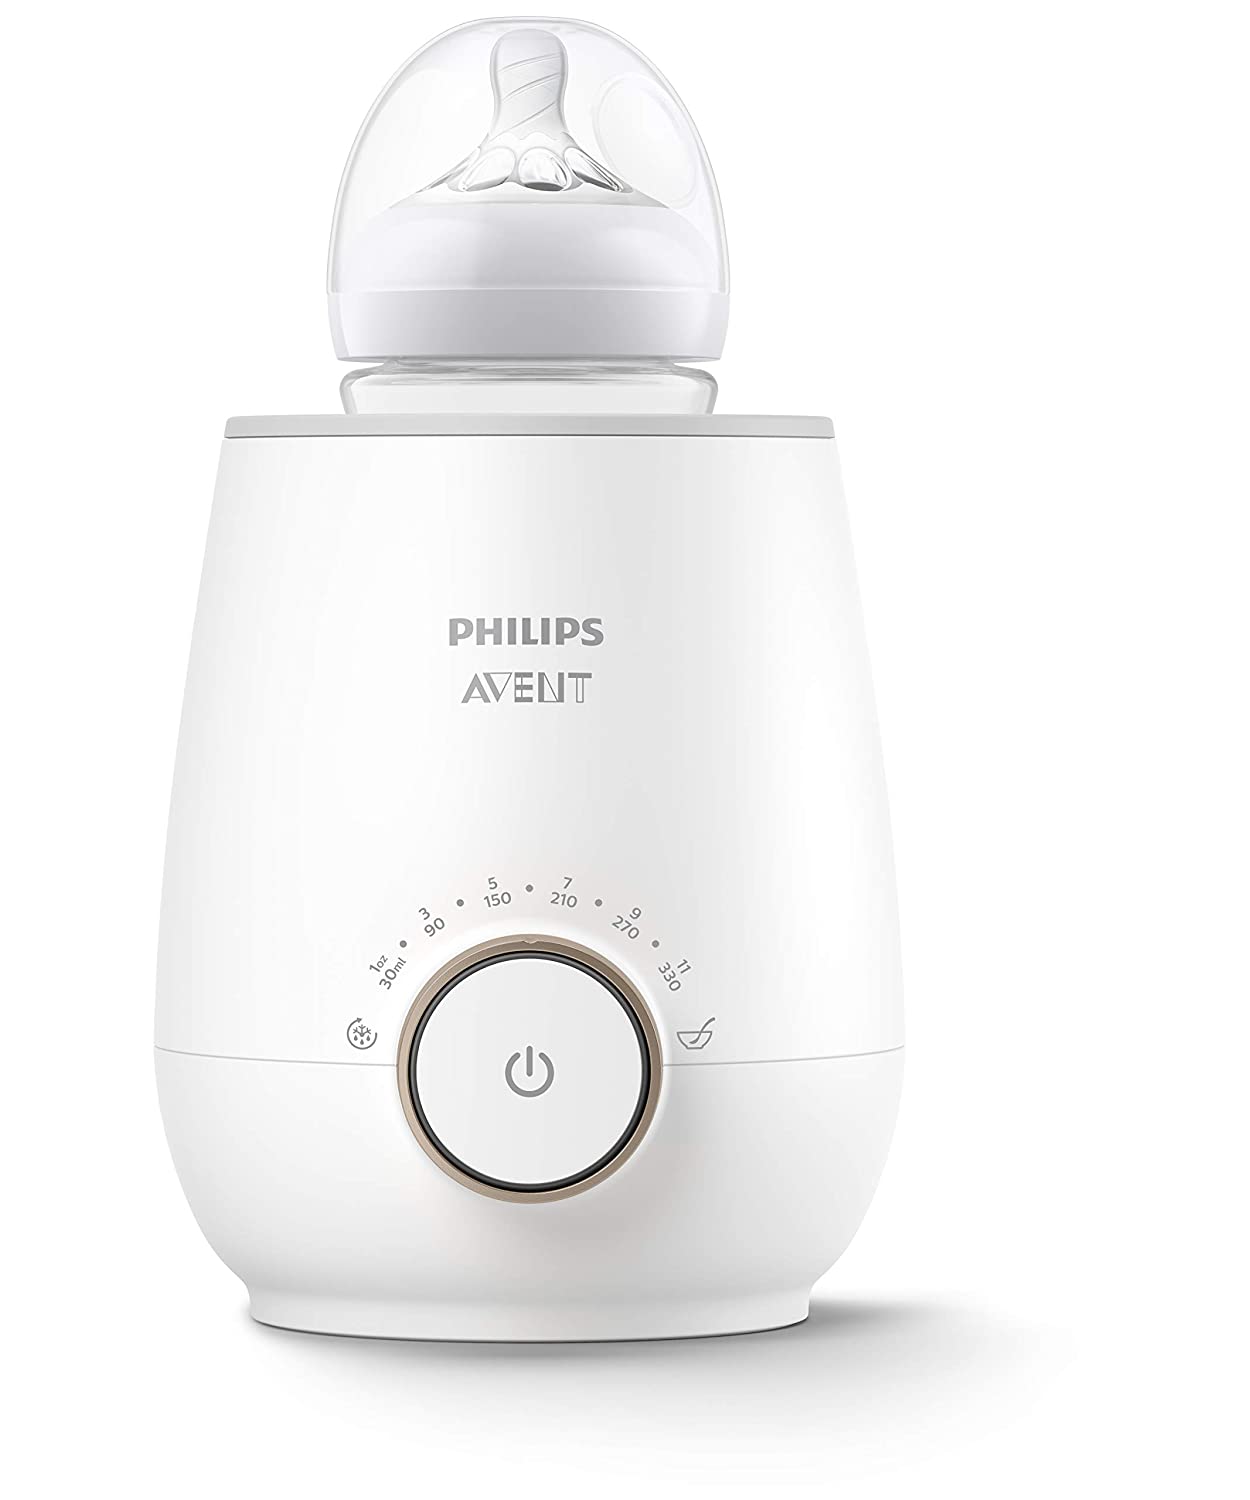 Philips Avent Fast Baby Bottle Warmer with Smart Temperature Control and Automatic Shut-Off